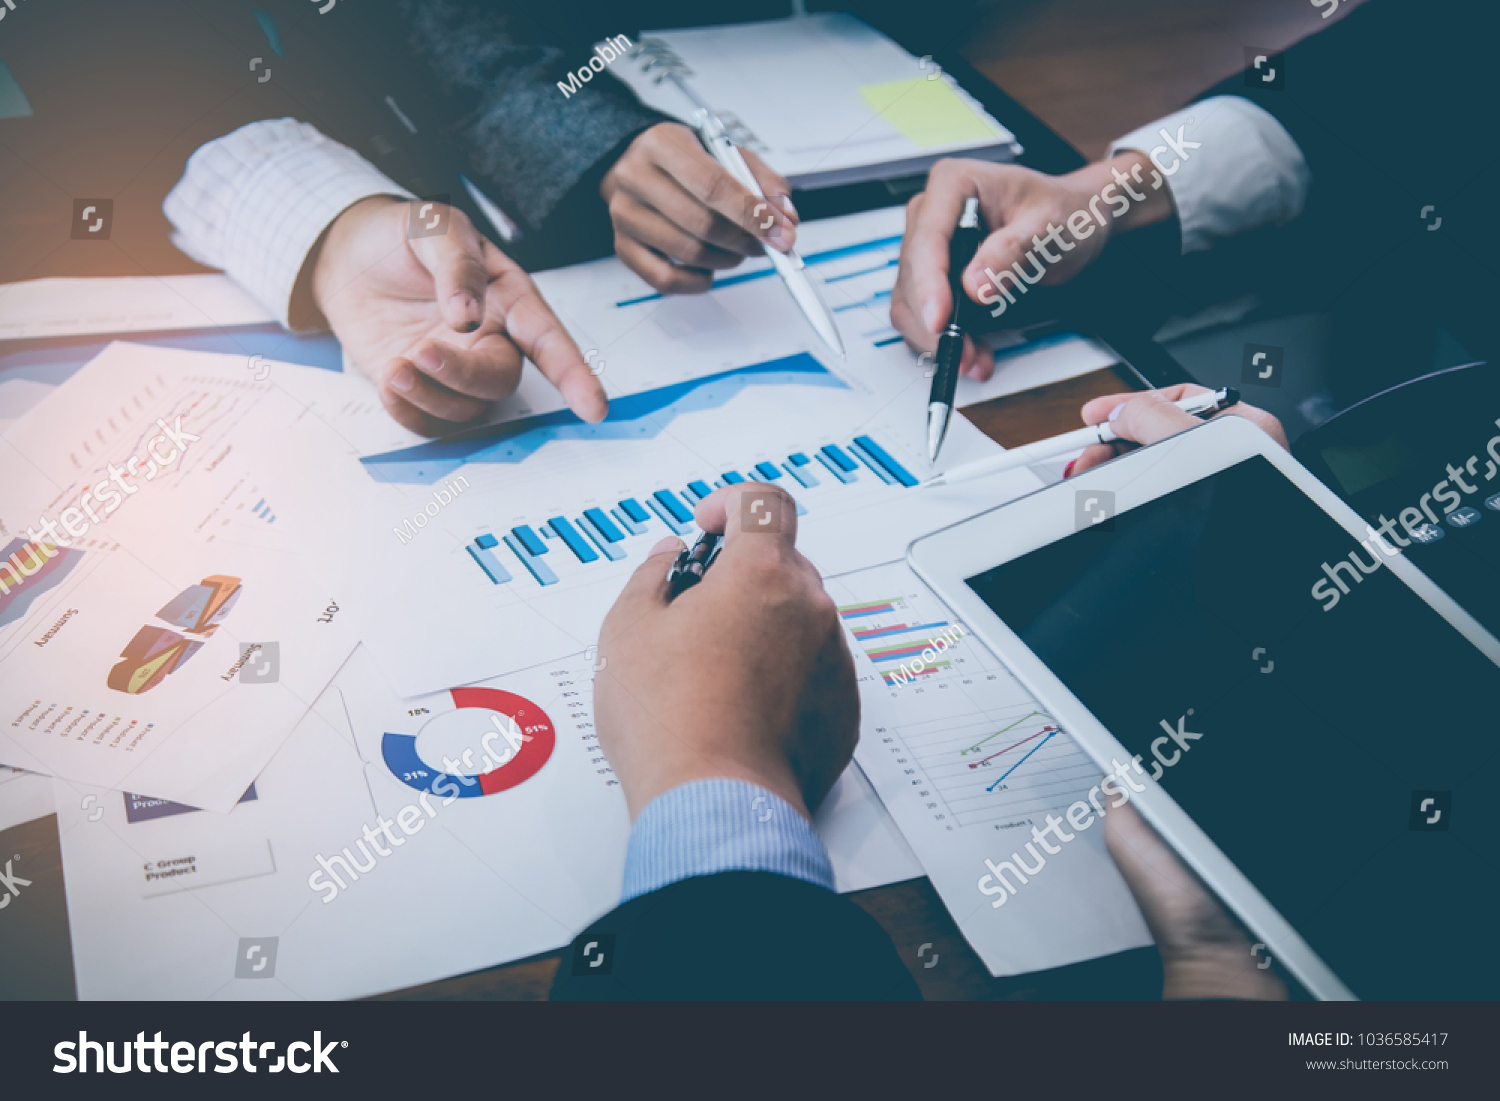 Corporate meetings, Business team organizations and investment plans at working with new startup project with chart,graph and business accessories on workplace. #1036585417